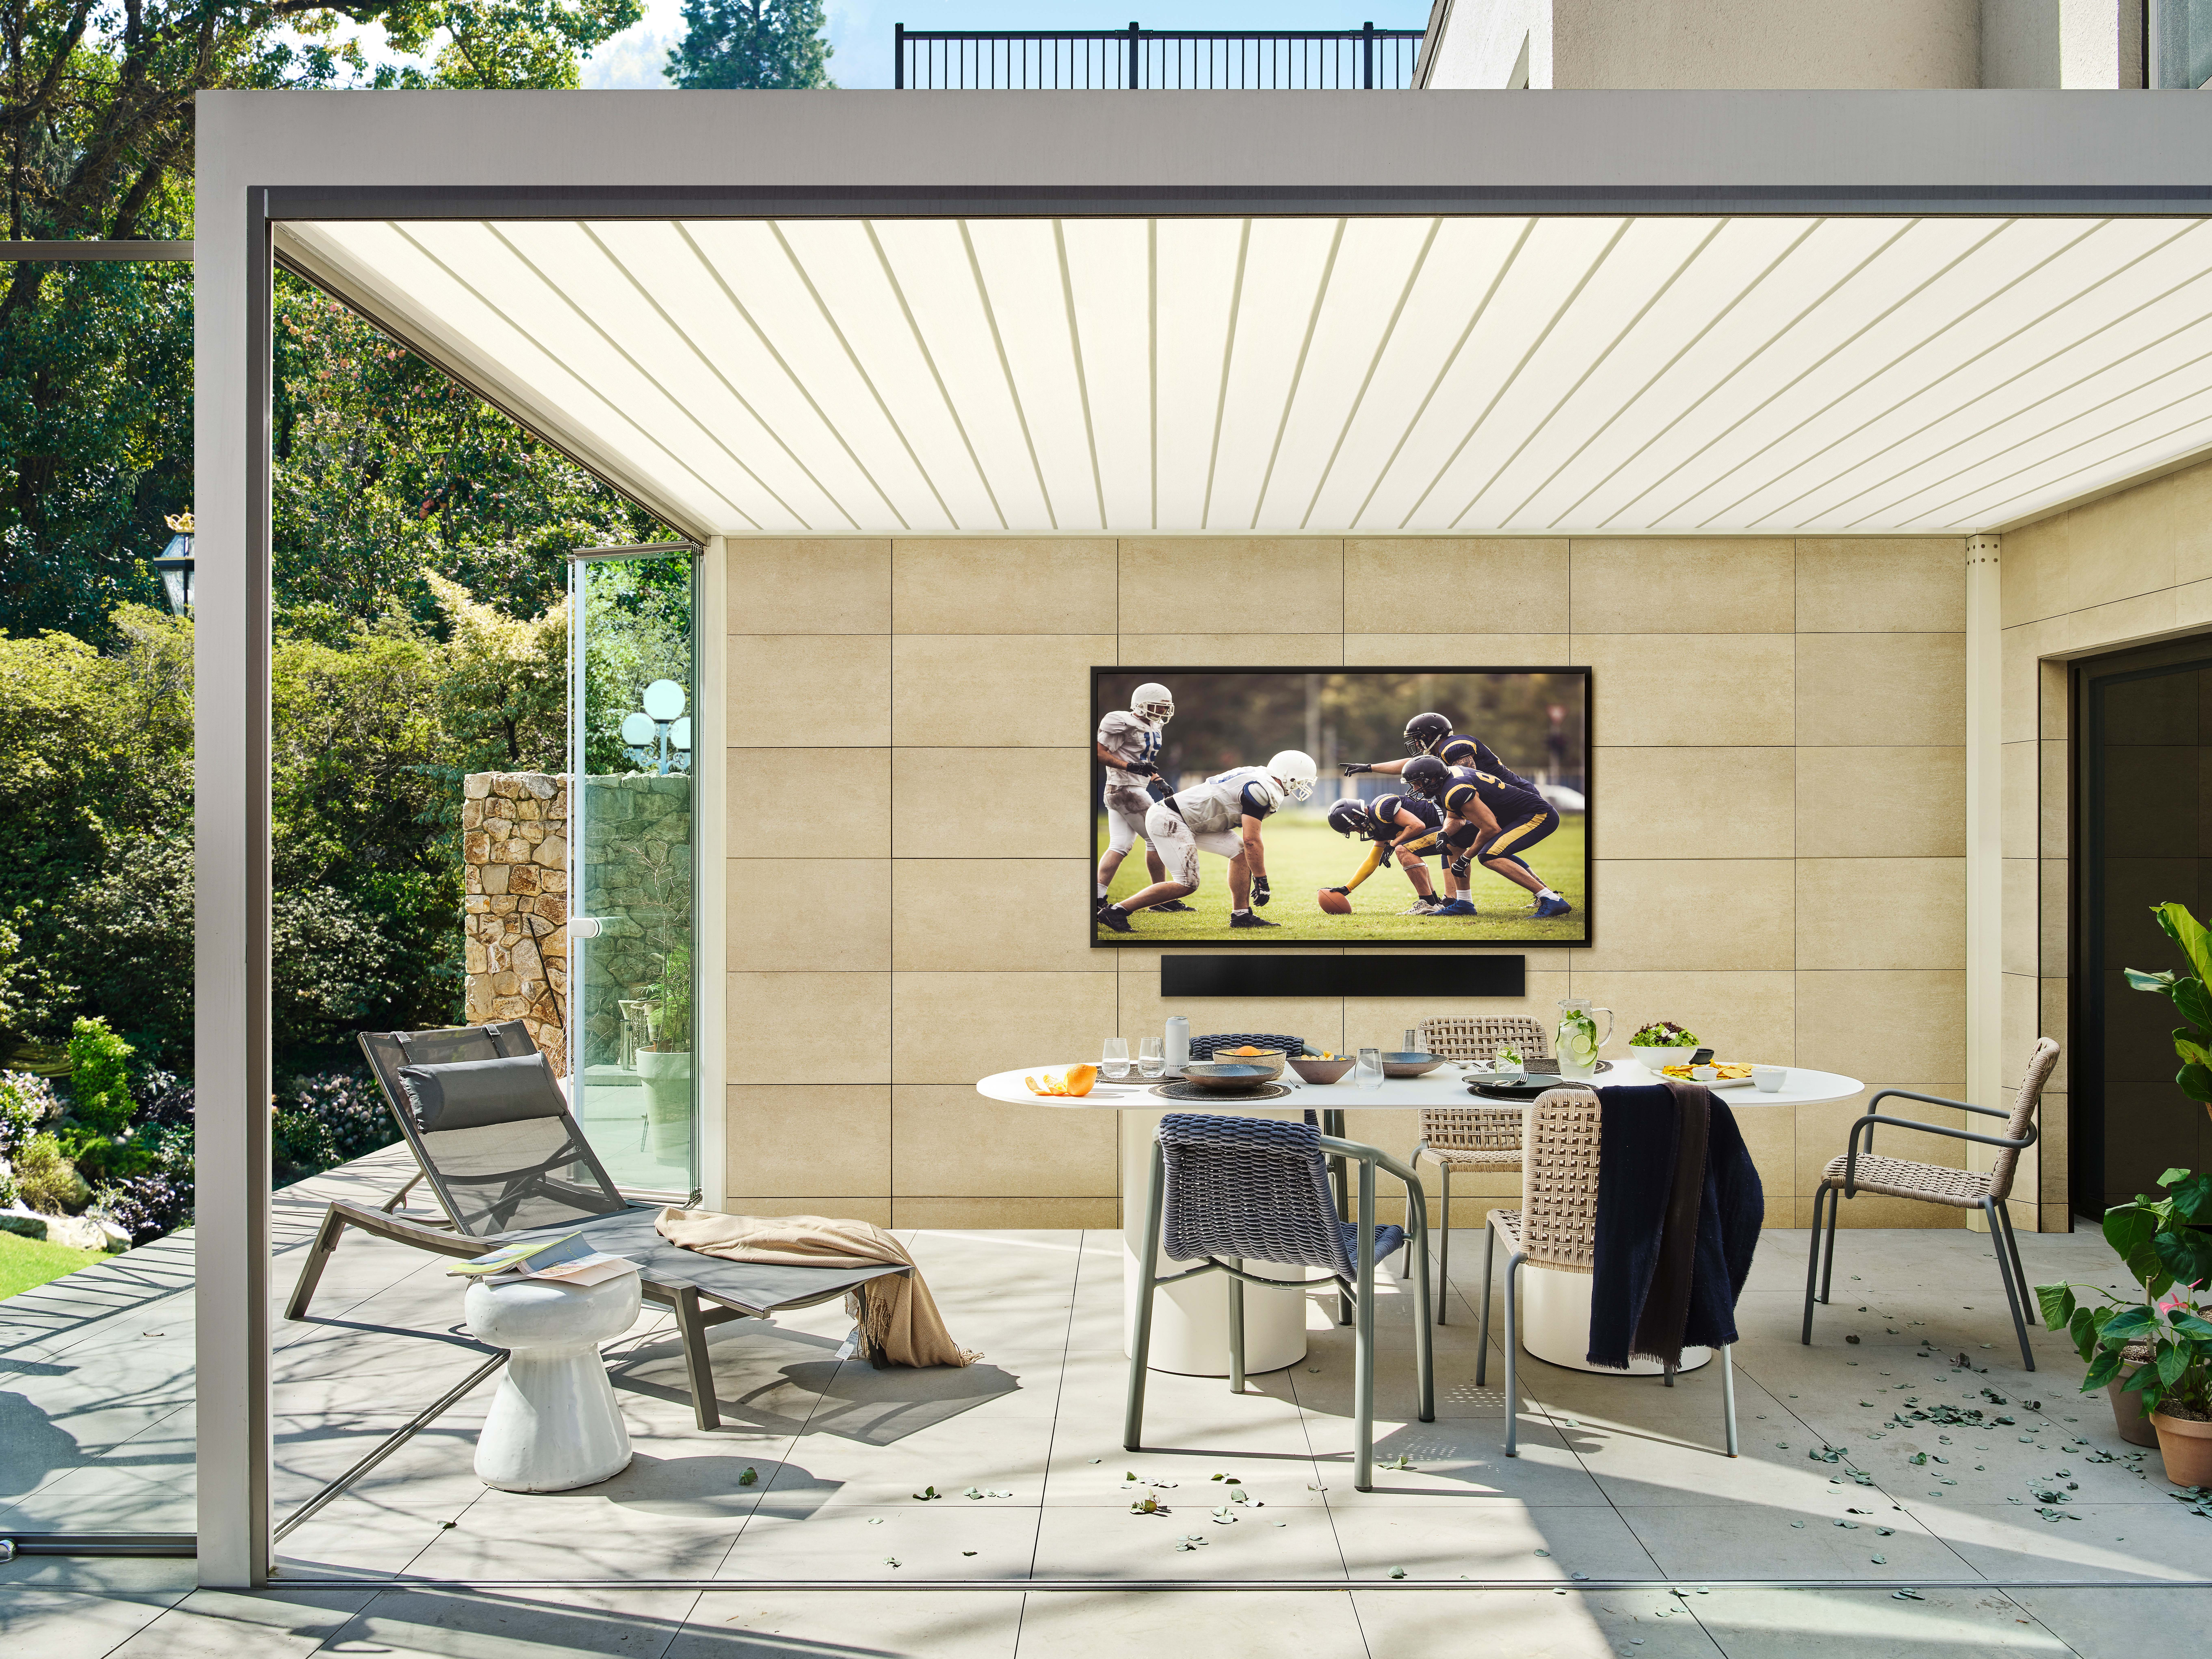 Outdoor Technology Ecosystem – Samsung The Terrace